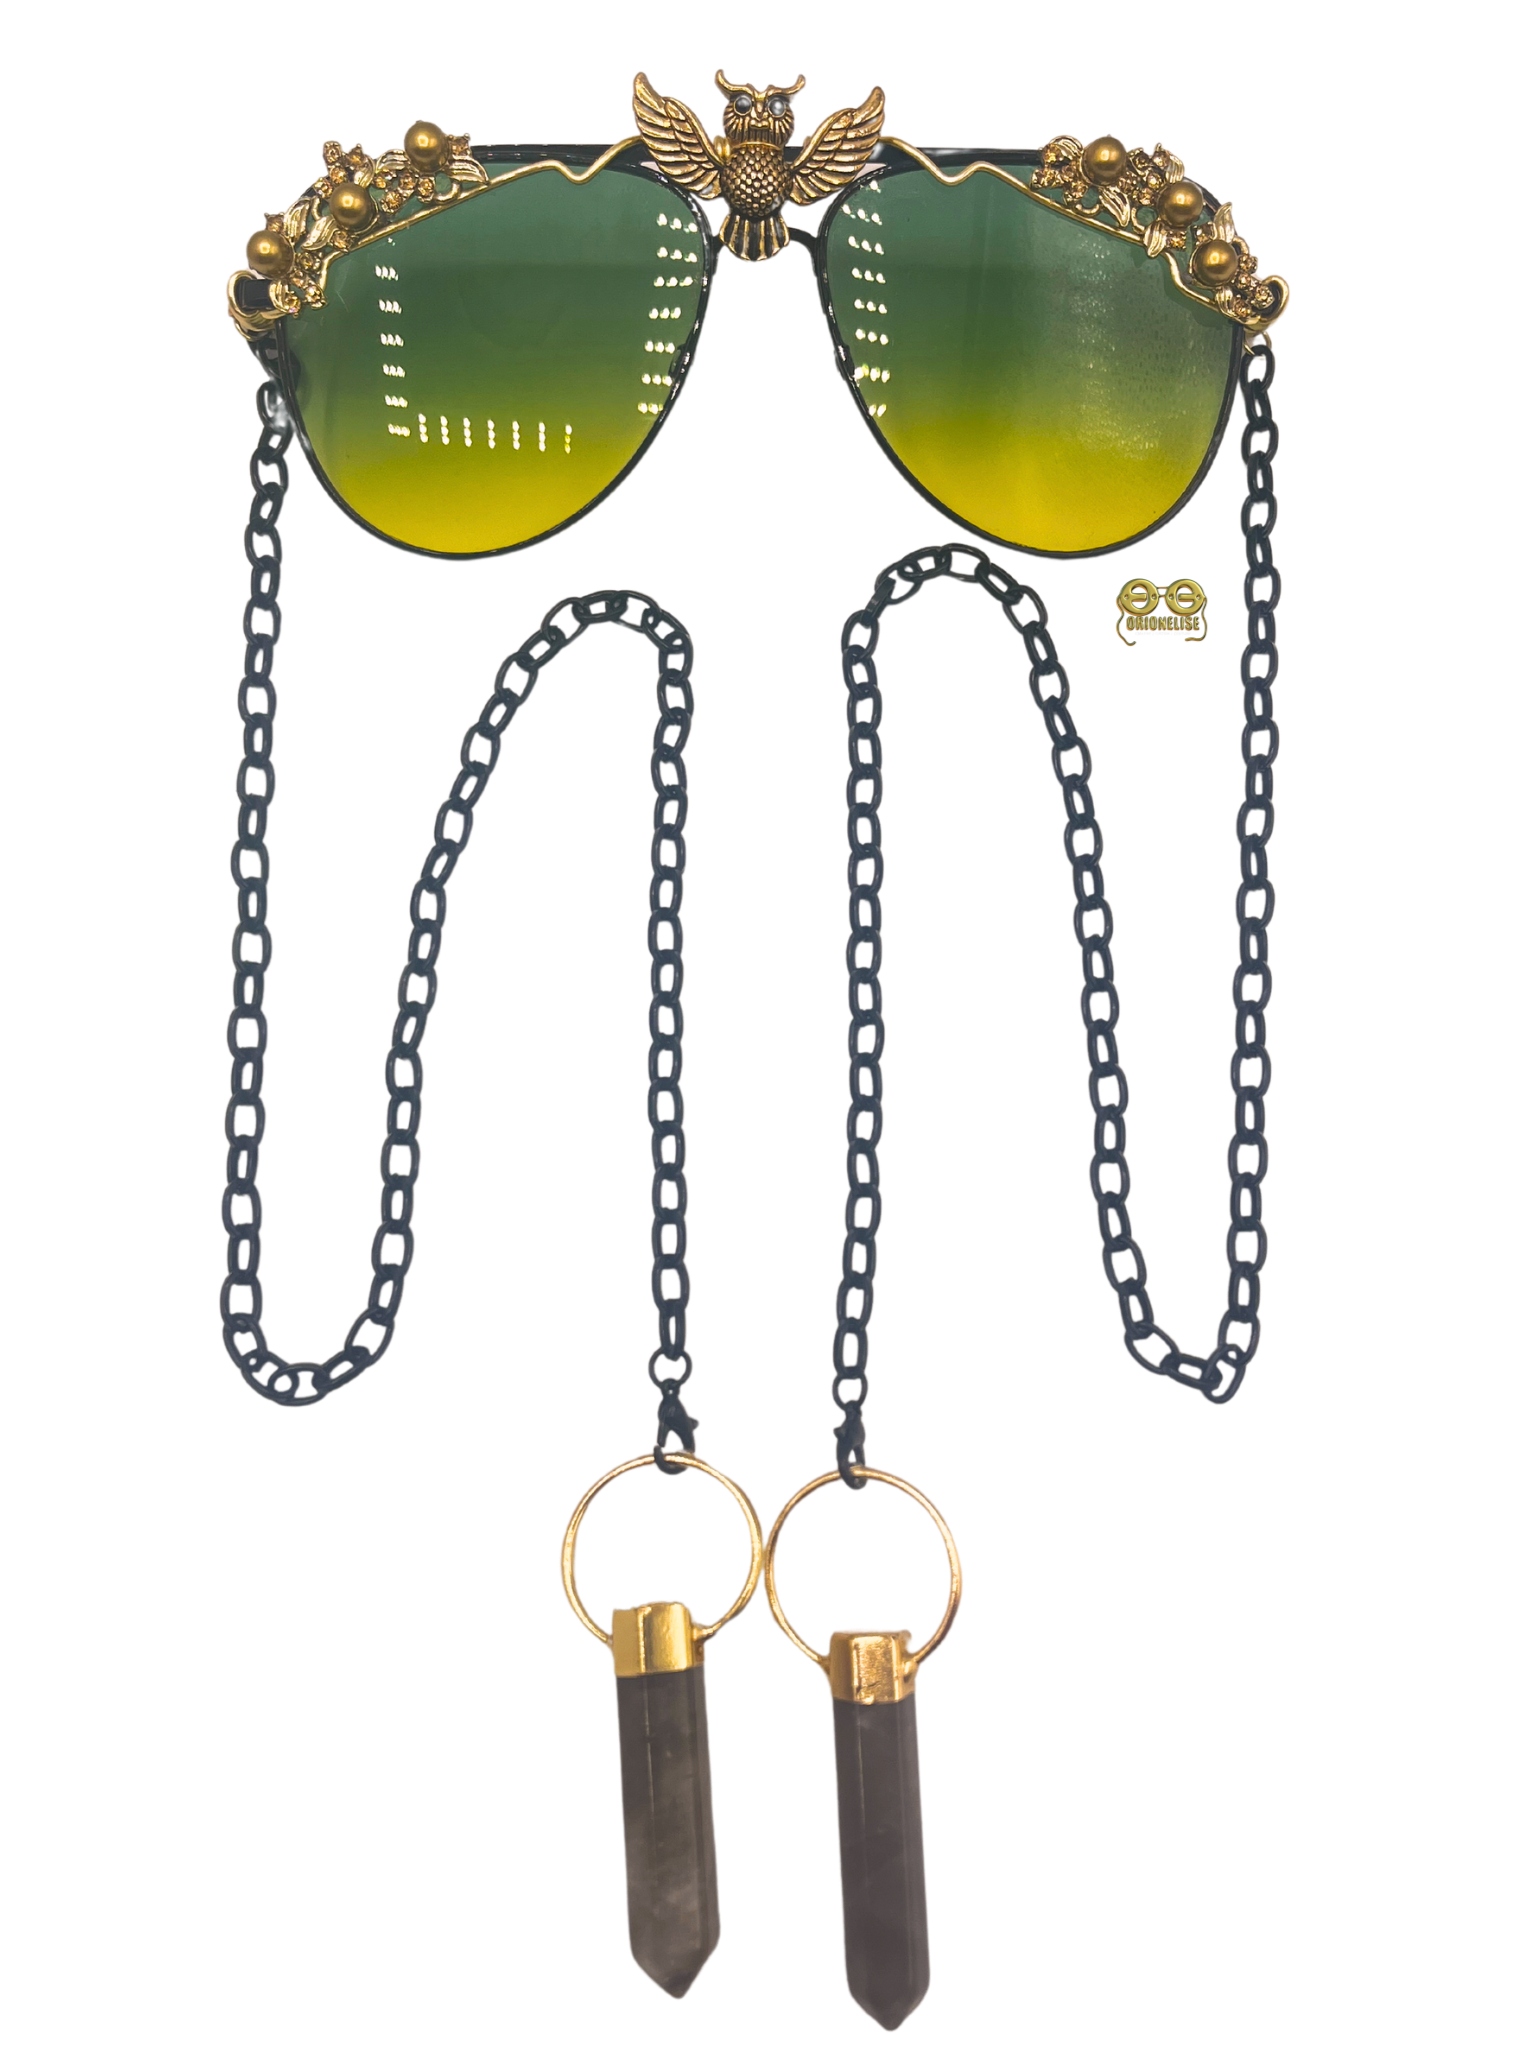 "All The Wiser" fashion eyewear by Orion Elise. Handcrafted black wire frame with captivating ombré lens transitioning from emerald green to golden yellow. Delicate gold wire accents and black chain with mesmerizing tourmaline stone.